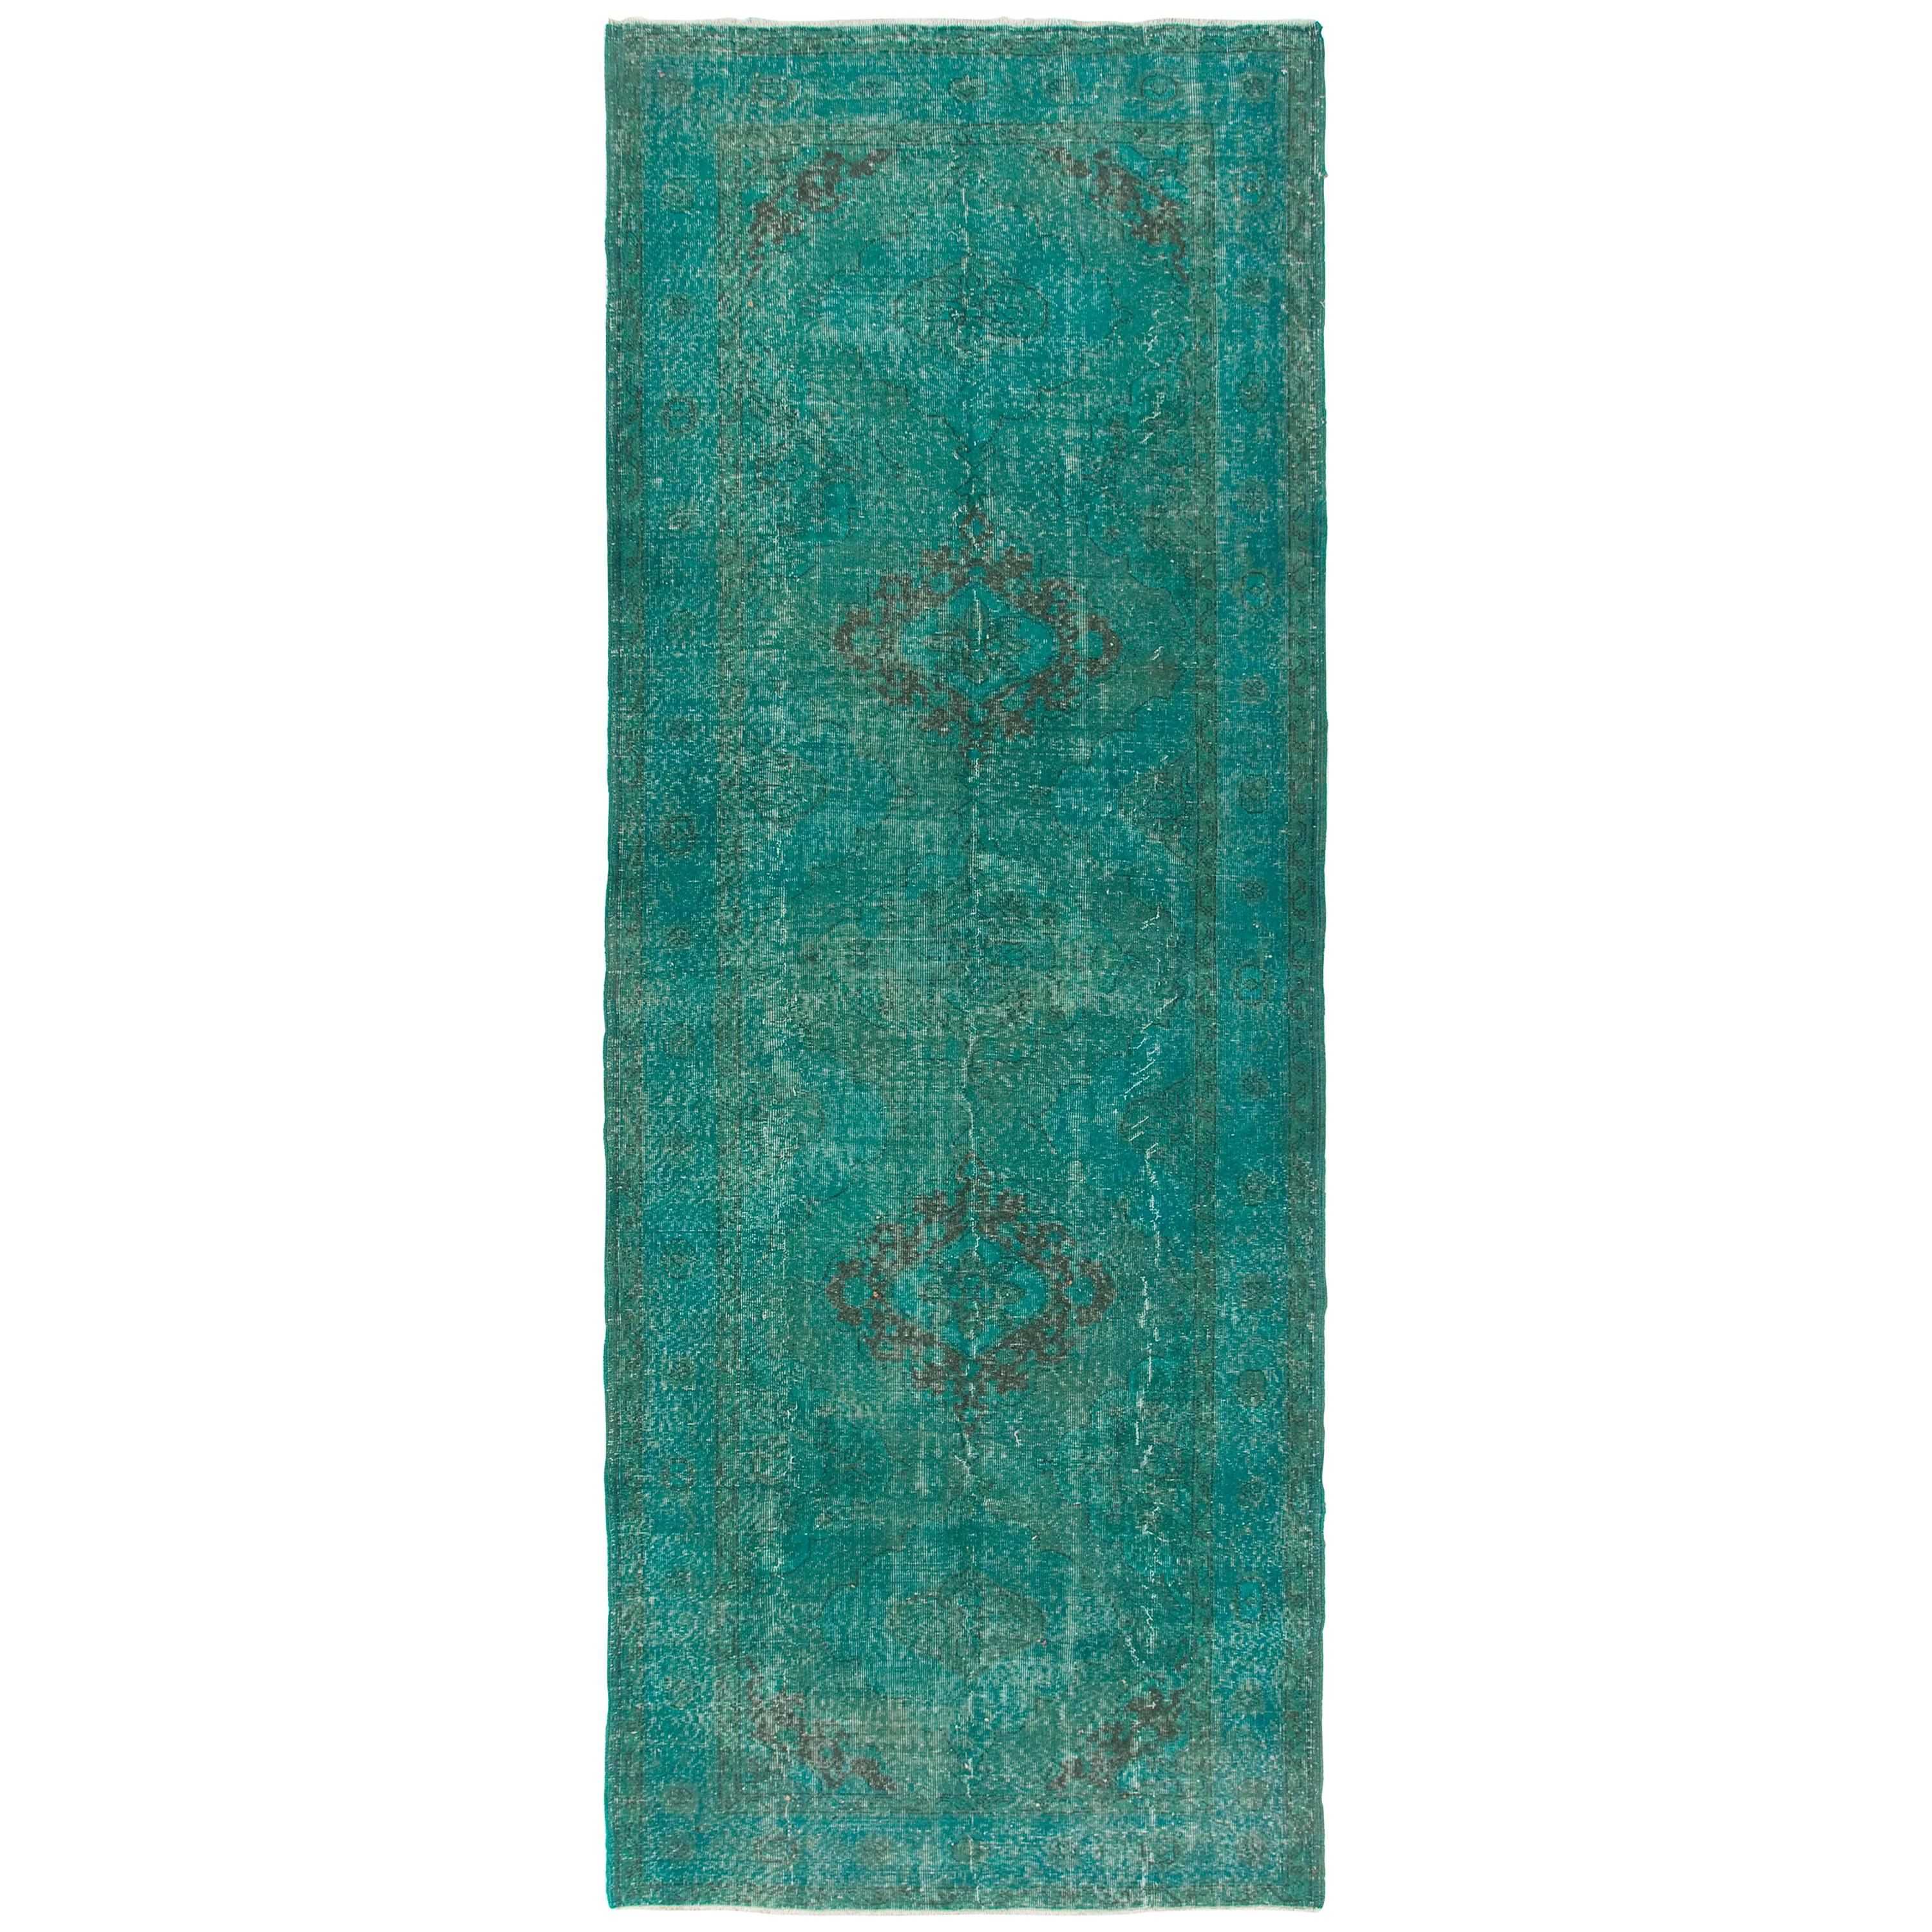 5x13 Ft (can be altered) Vintage Runner Rug Overdyed in Teal 4 Modern Interiors